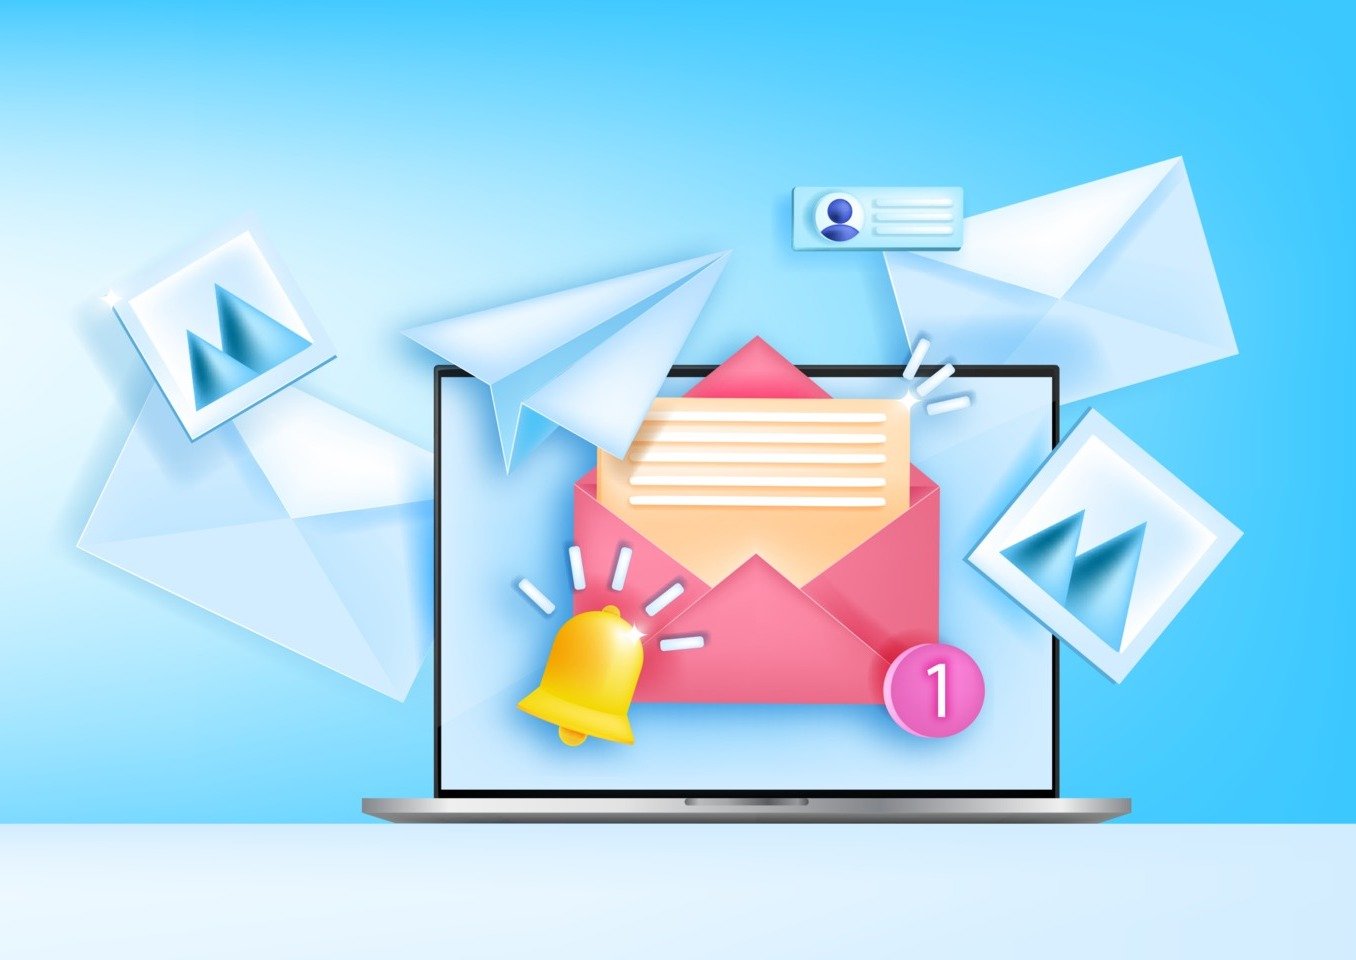 Best Free Email Services of 2022